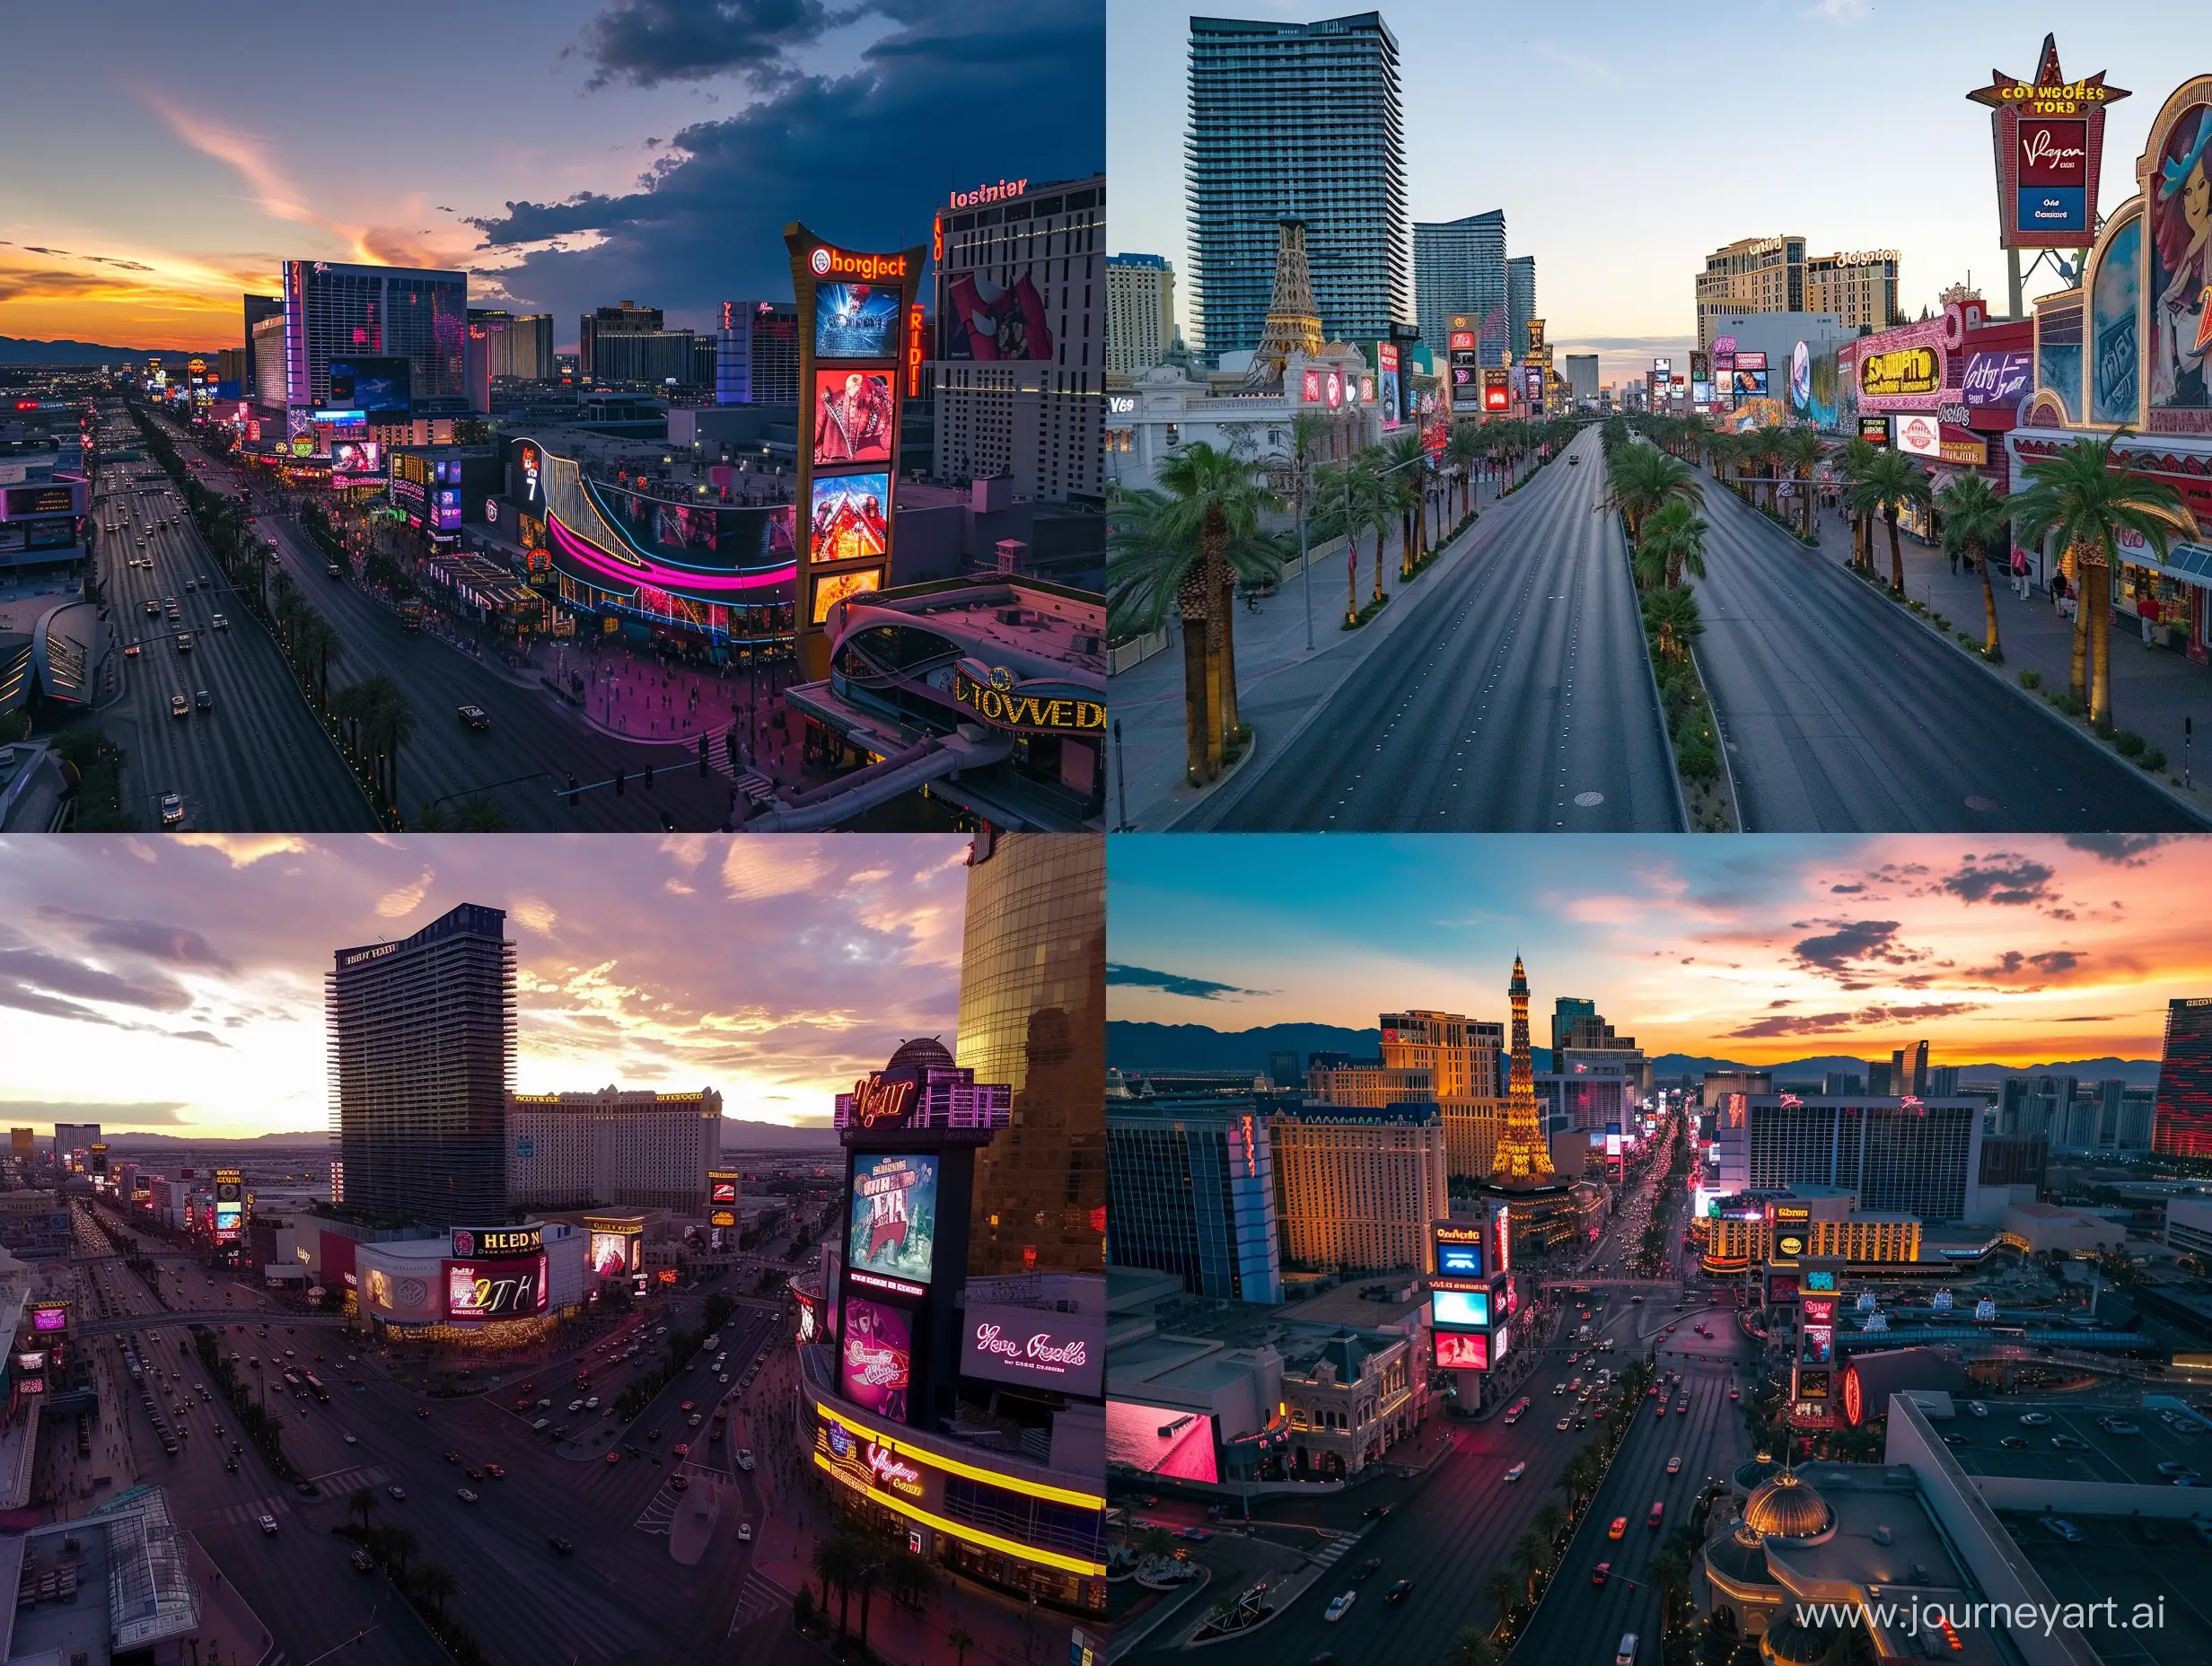 phone photo of los vegas, photography, natural lighting, scenes, skyline, drone view, billboards an stores,